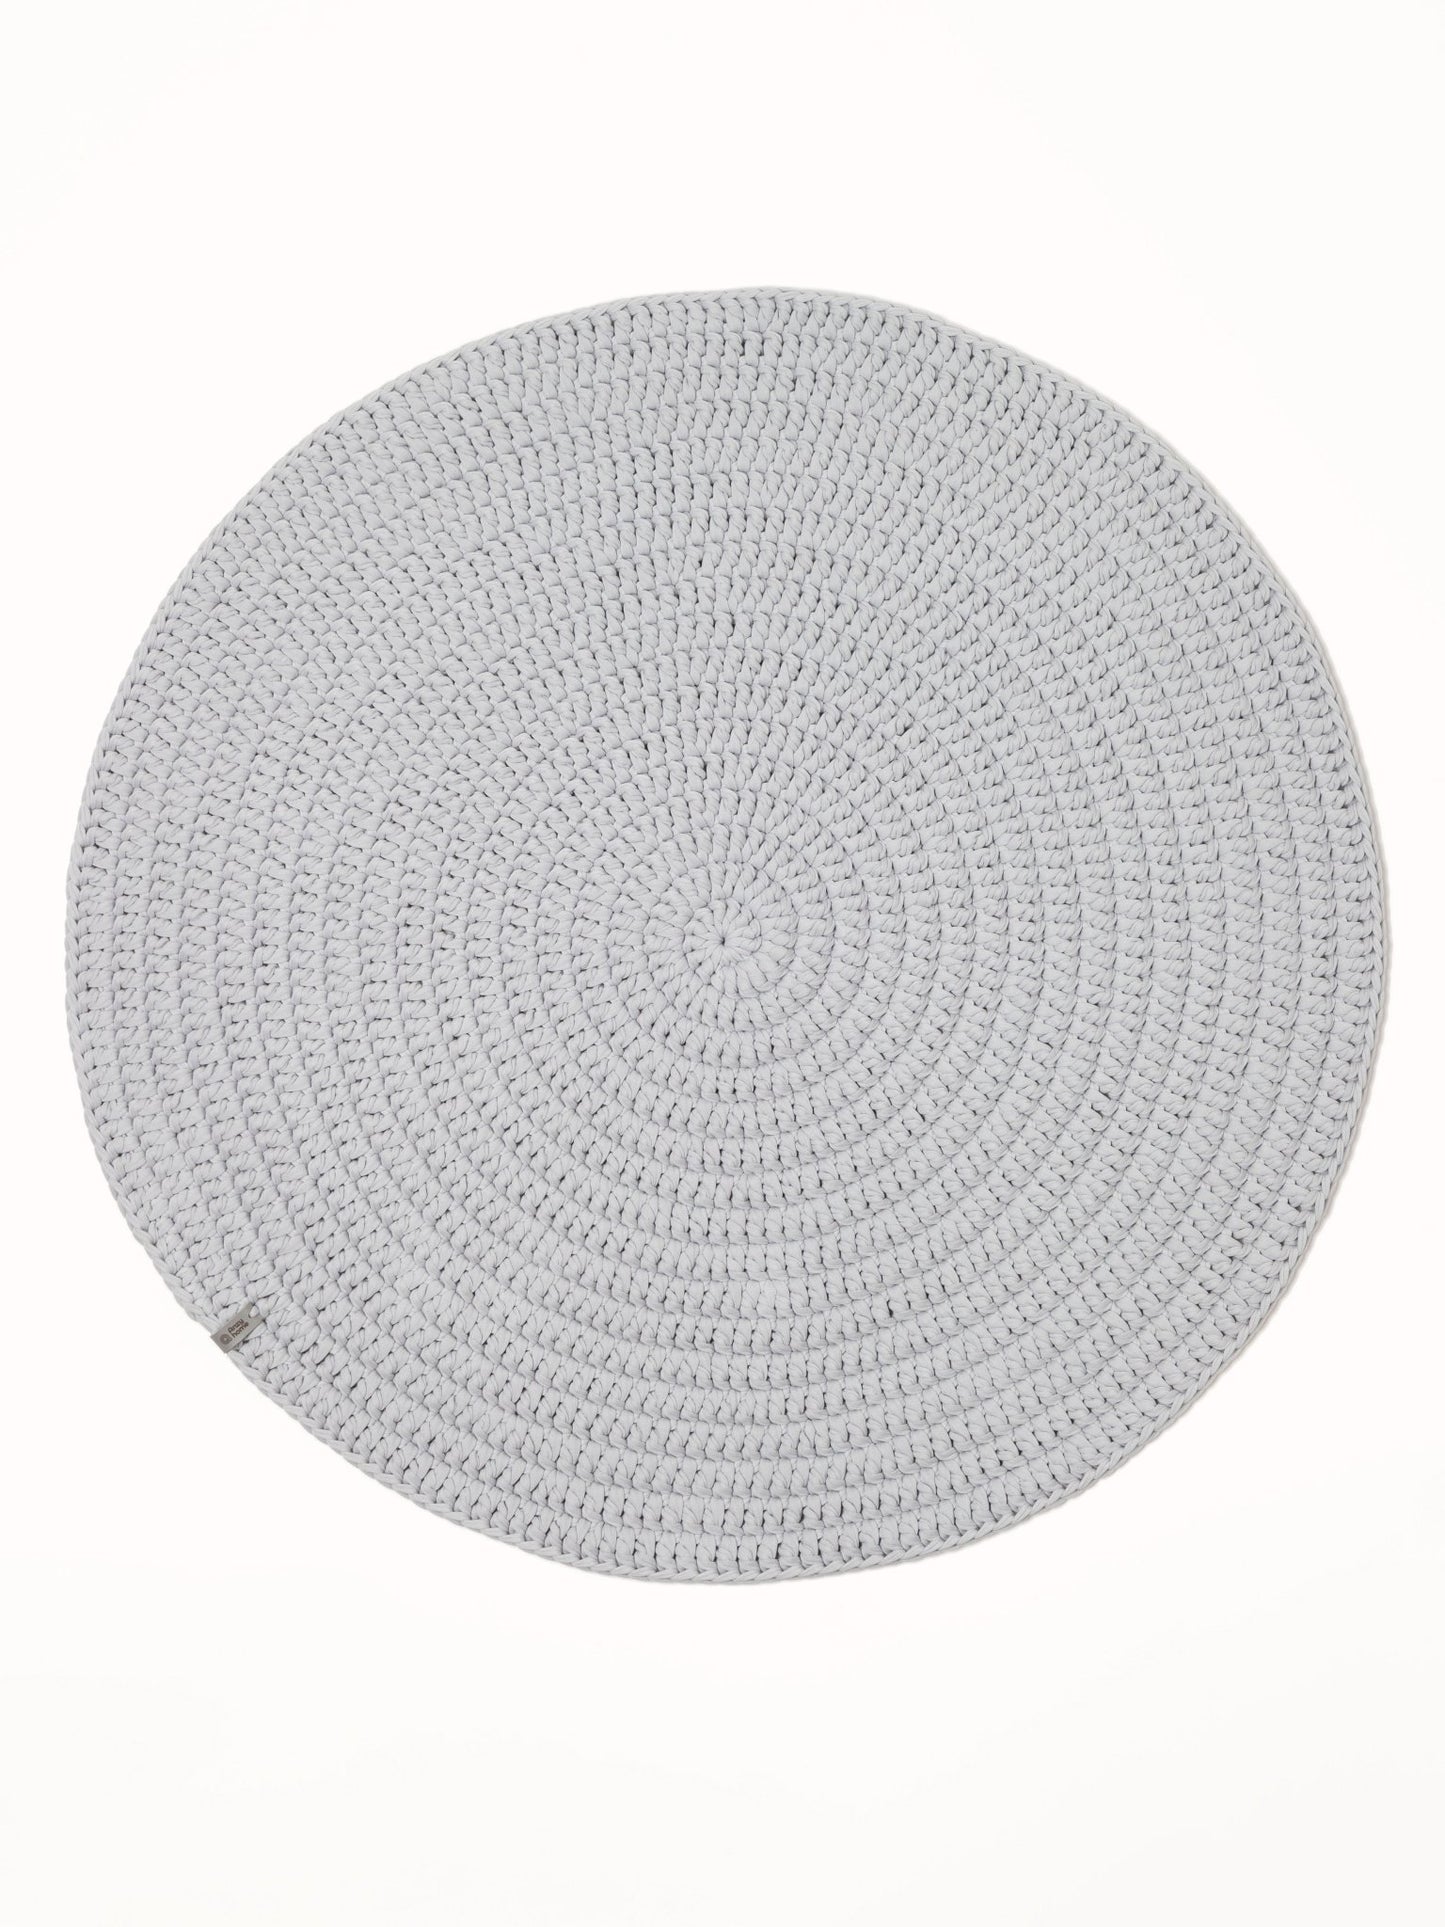 ANZY HAND-WOVEN SOLID AREA RUG - The Modern Heritage